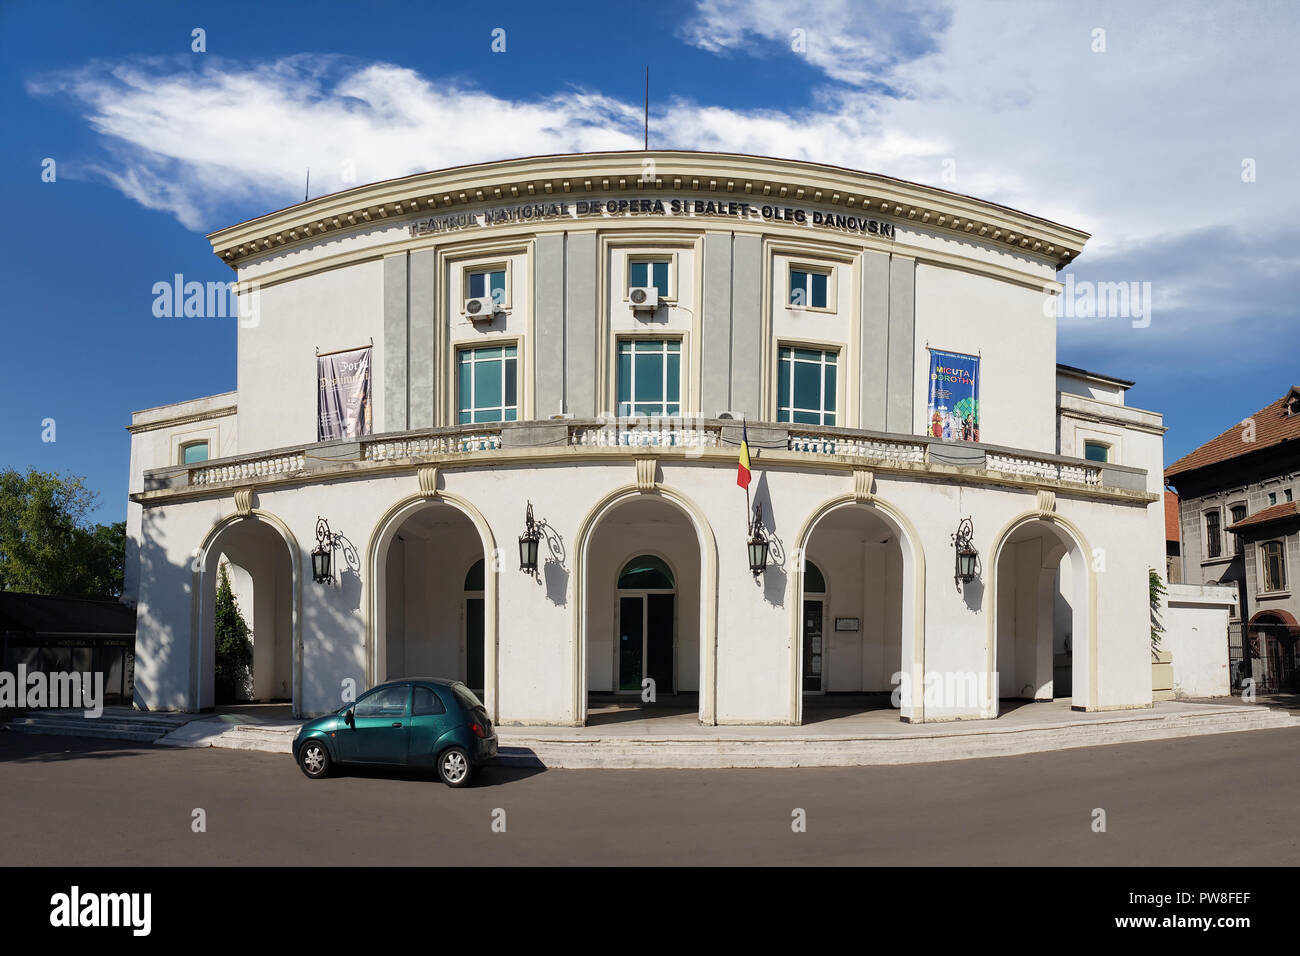 Panoramic view of National ballet and opera theater in Constanta, Romania Stock Photo